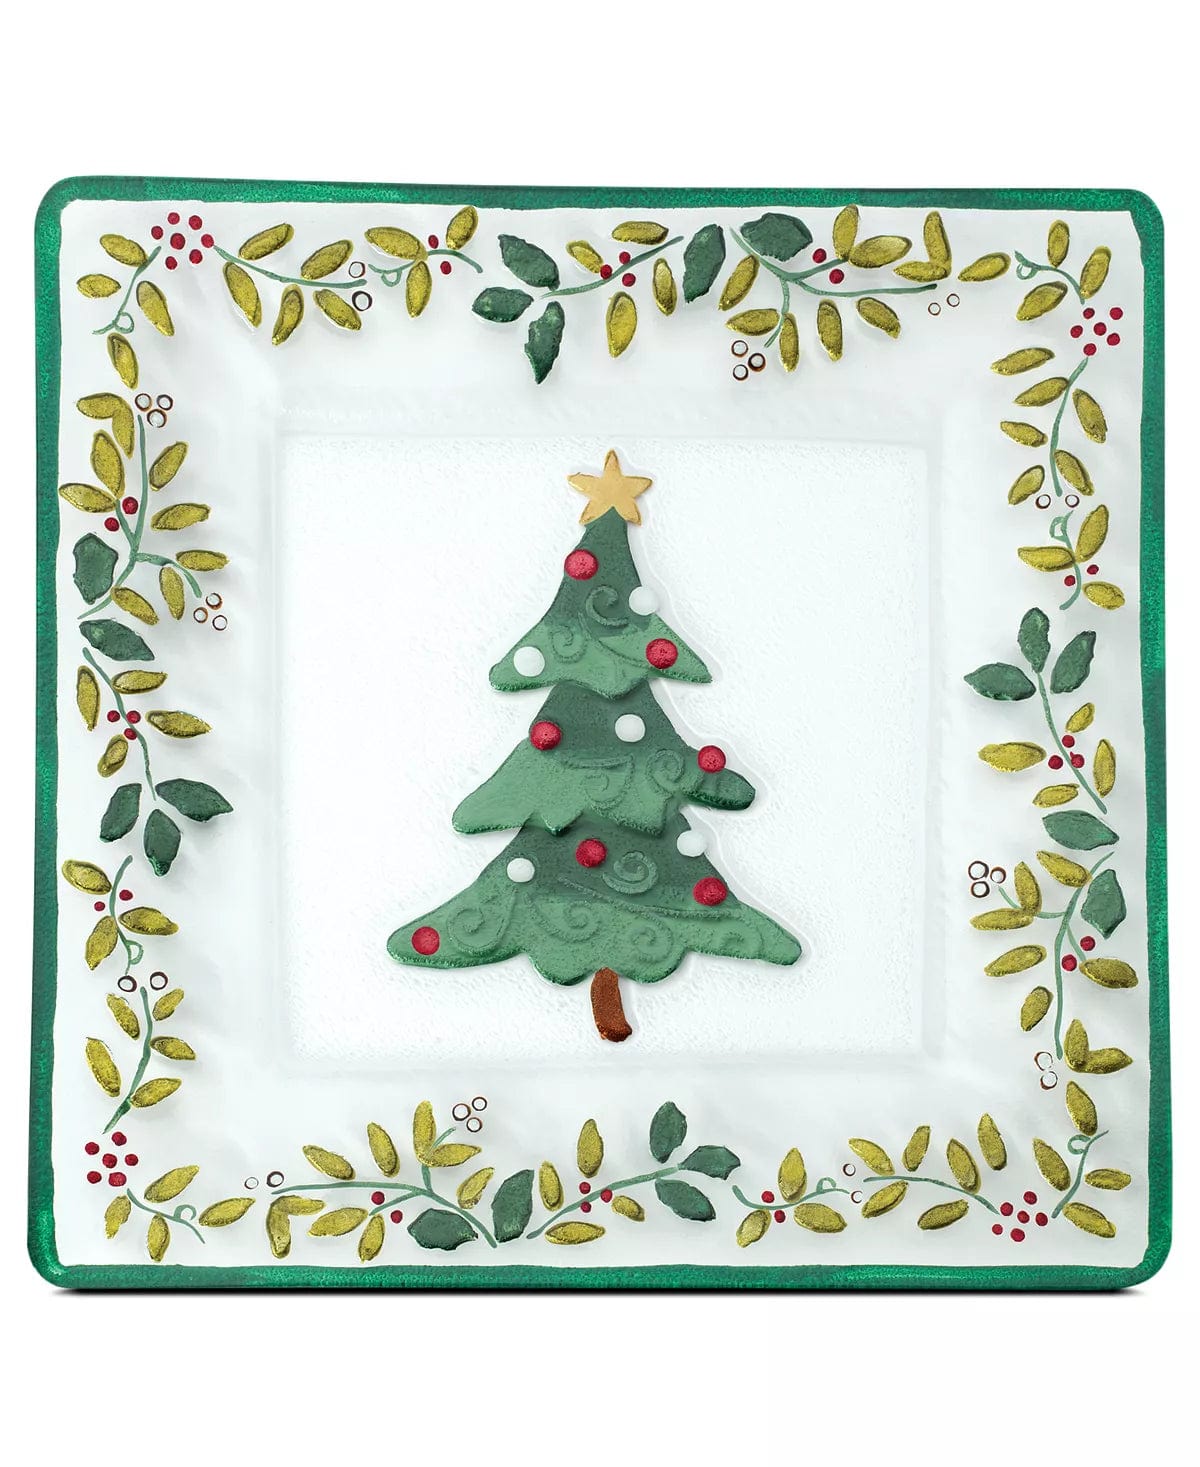 Winterberry Square Glass Christmas Tree Platter Crafted of High Quality Pressed Glass Imported